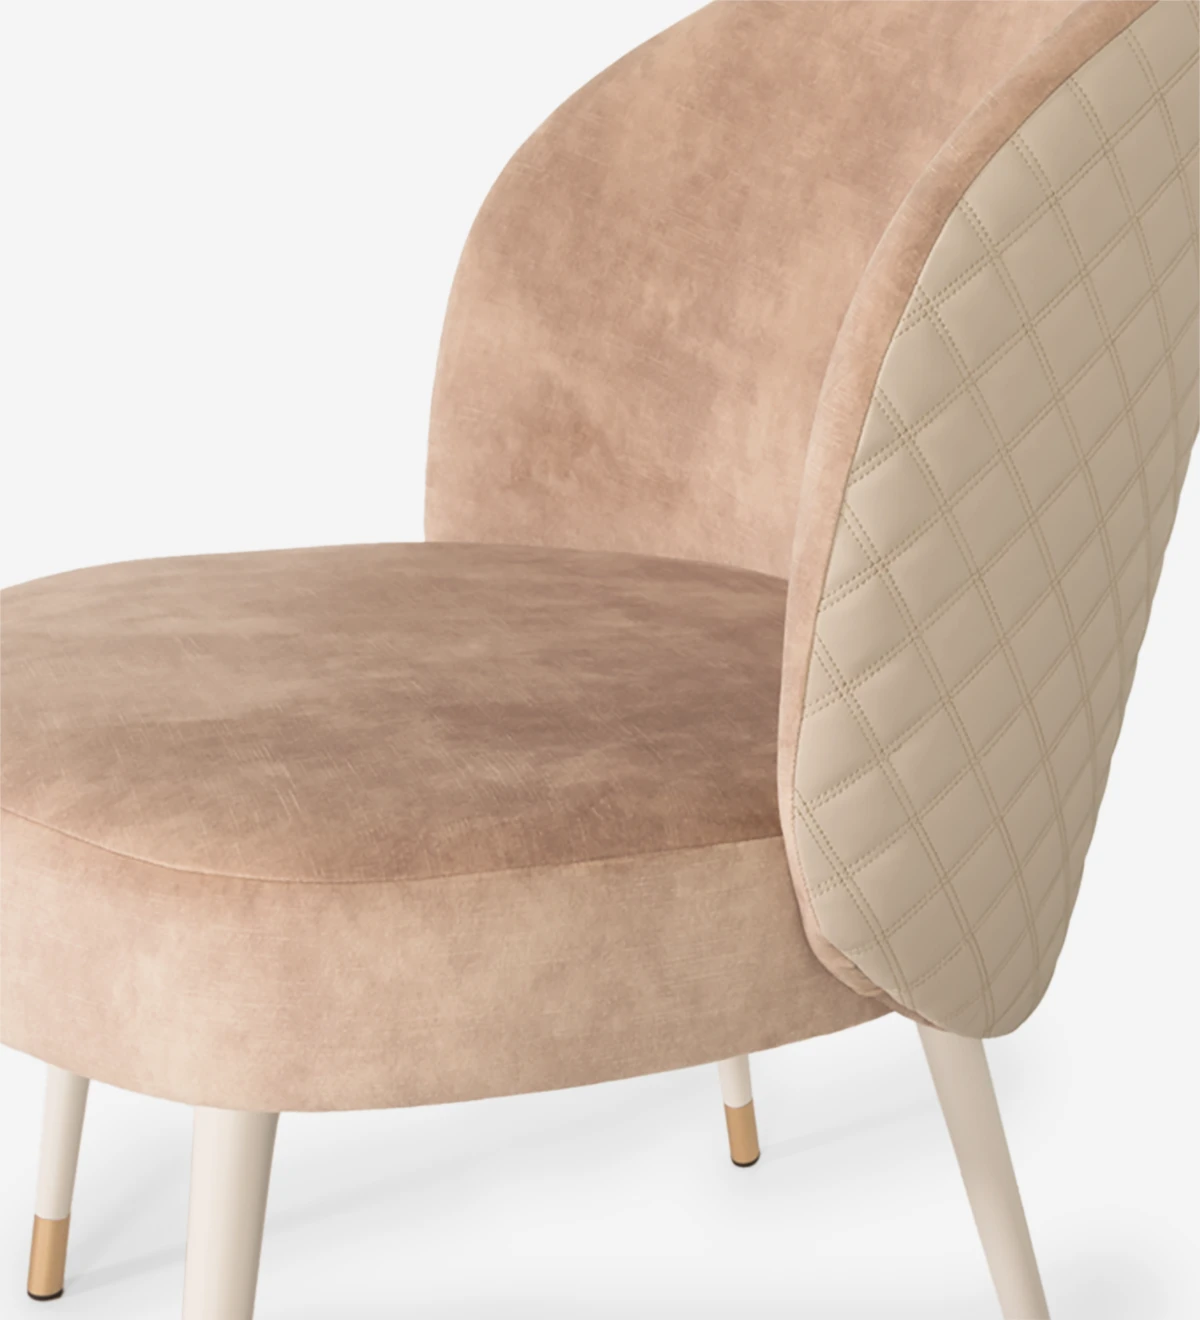 Armchair upholstered in fabric, with pearl lacquered feet and gold detailing.